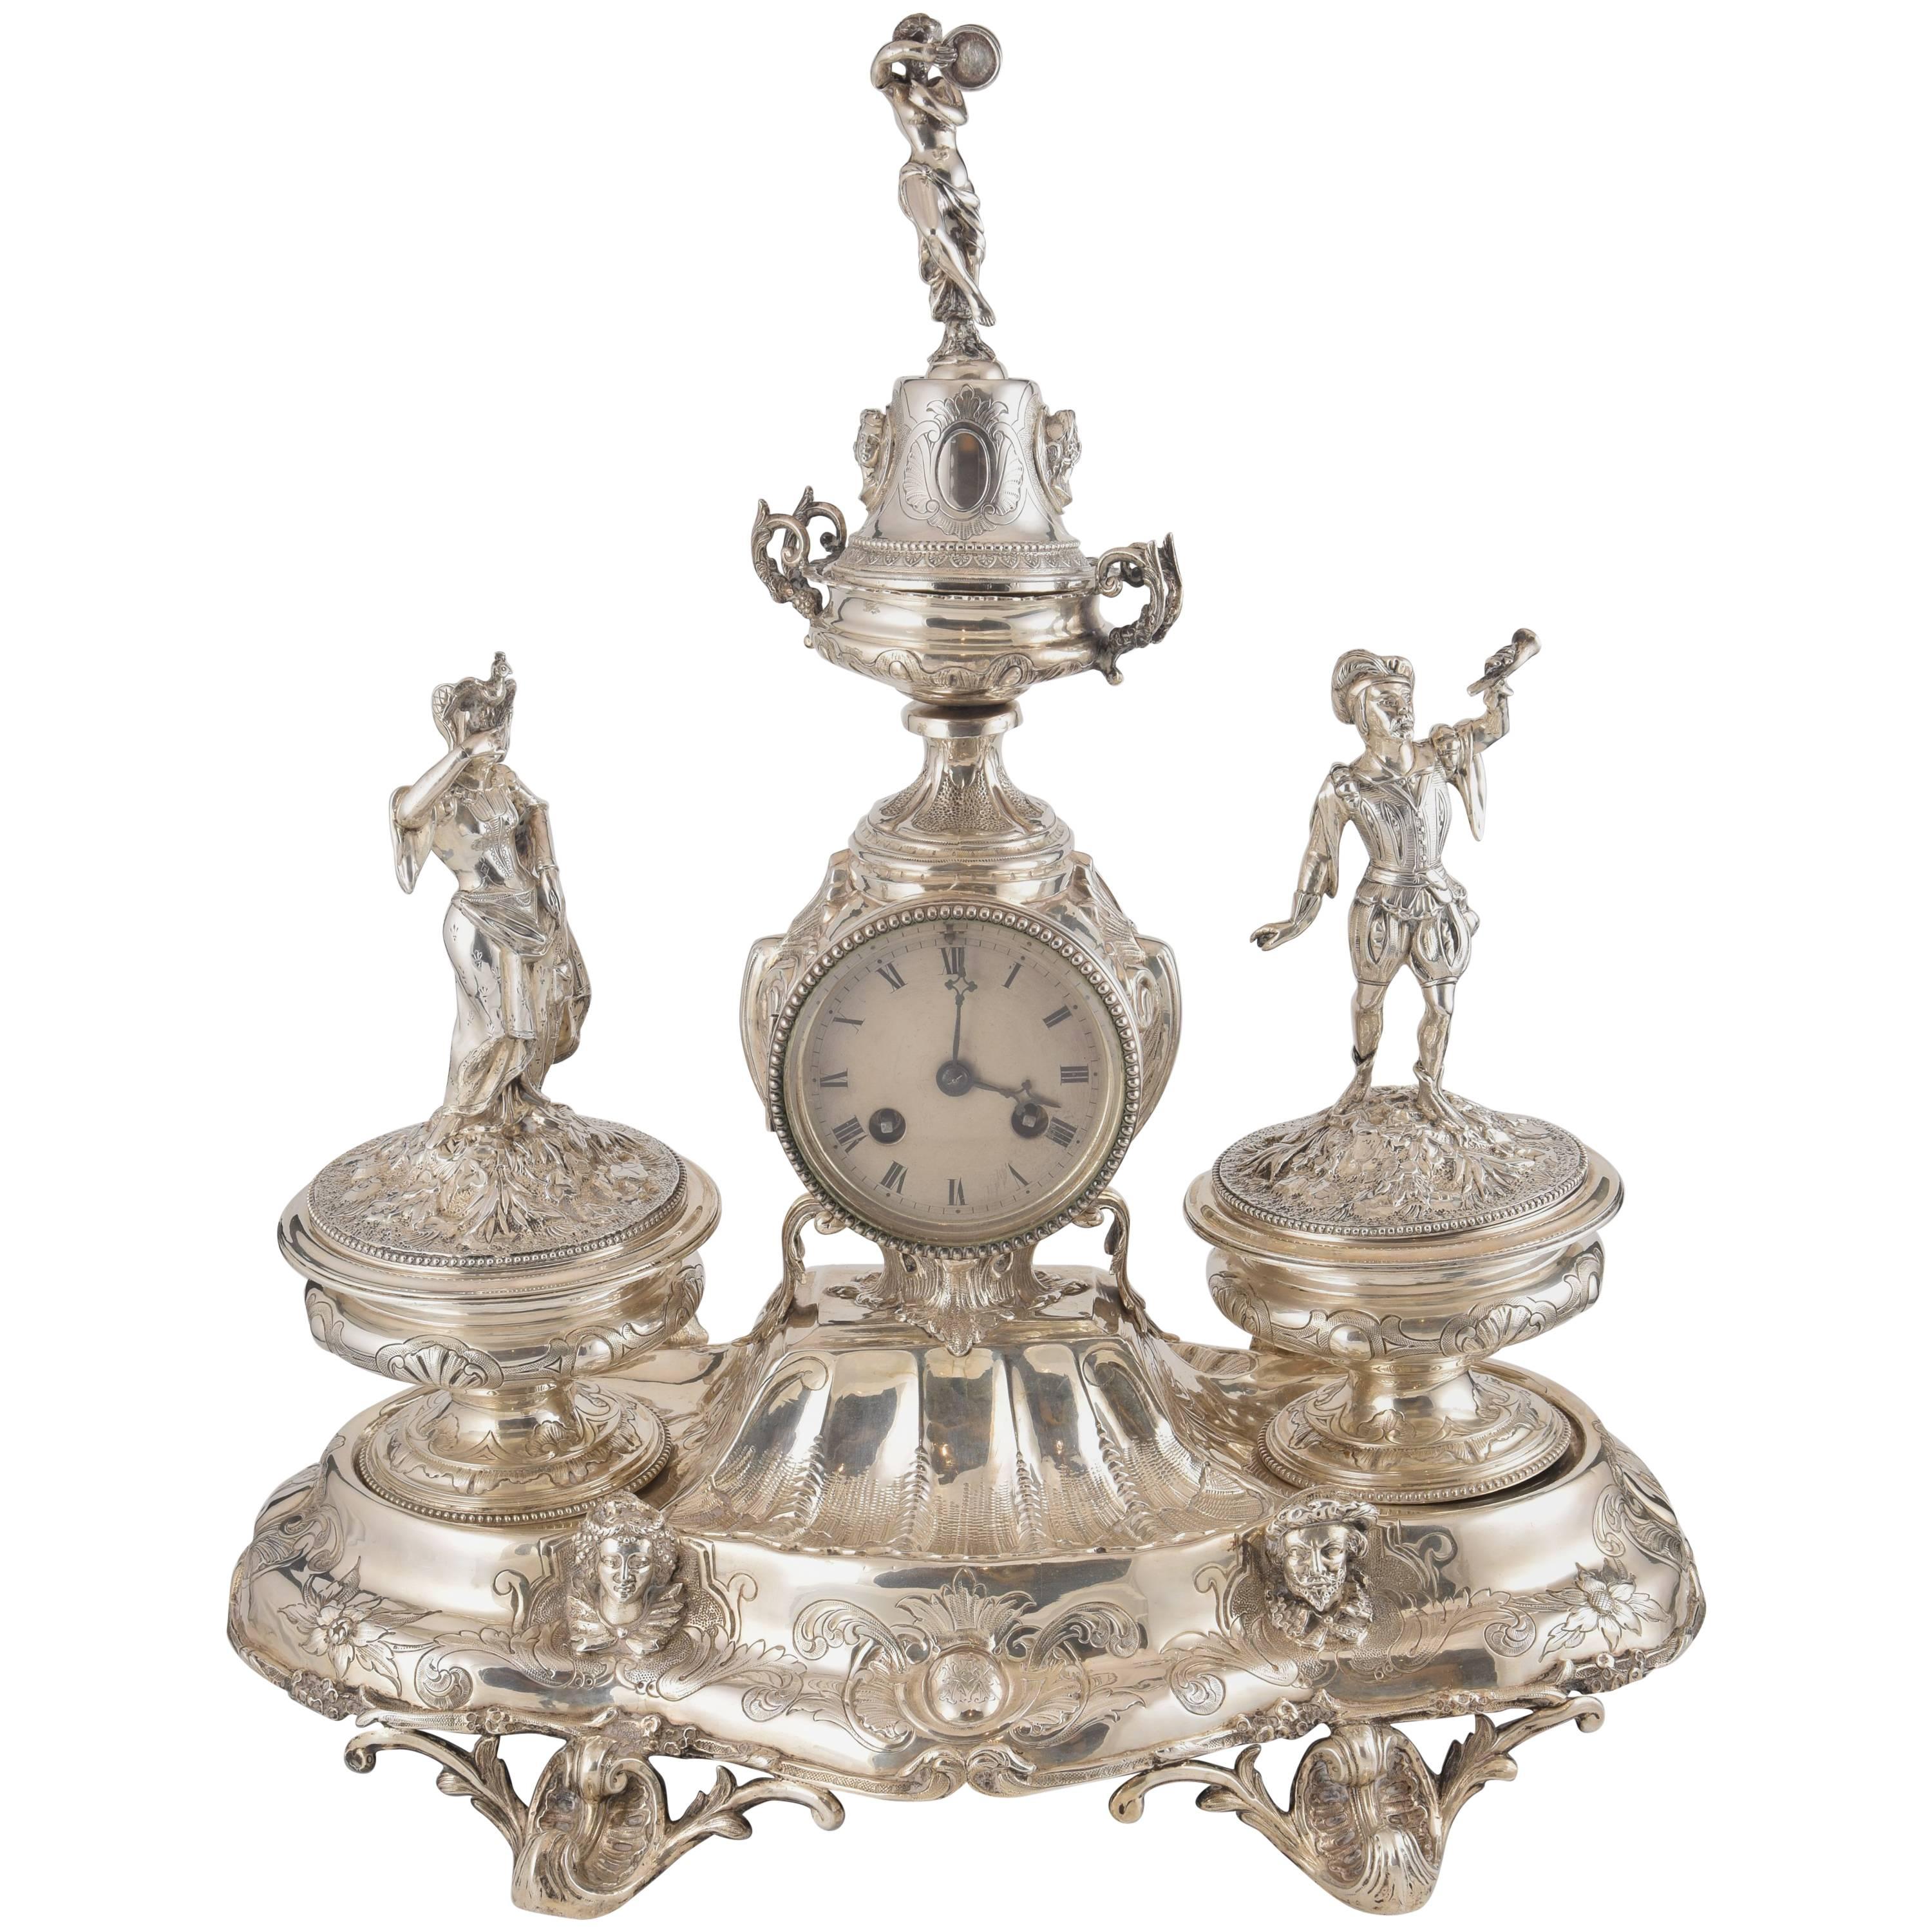 Solid Silver Writing Set with Clock, France, 19th Century with Hallmarks